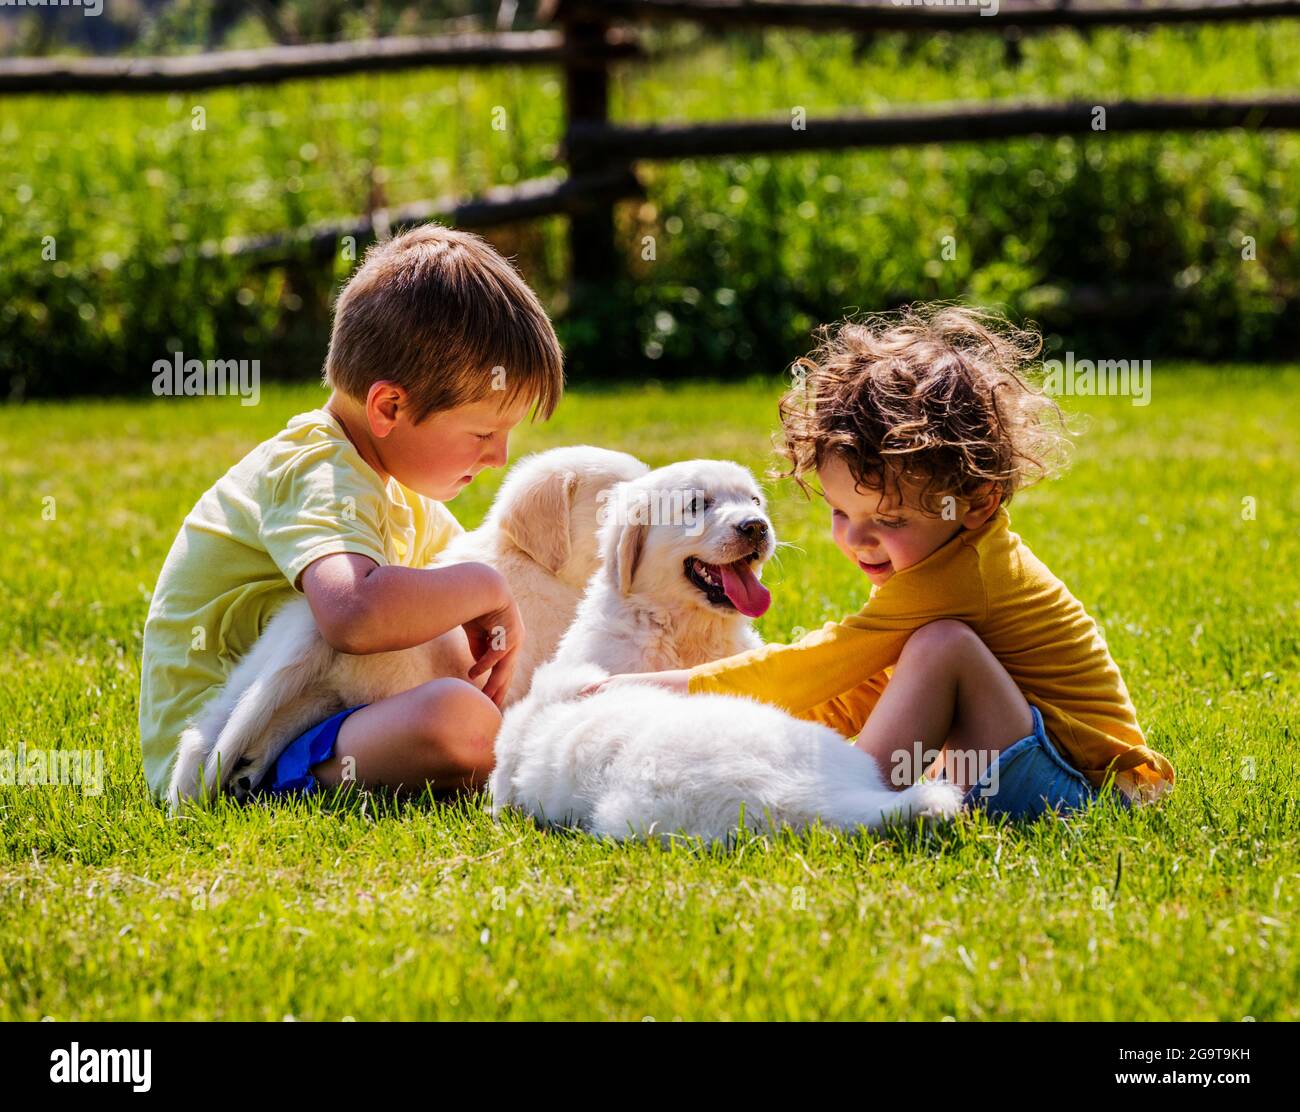 Two young children playing on grass with six week old Platinum, or Cream colored Golden Retriever puppies. Stock Photo